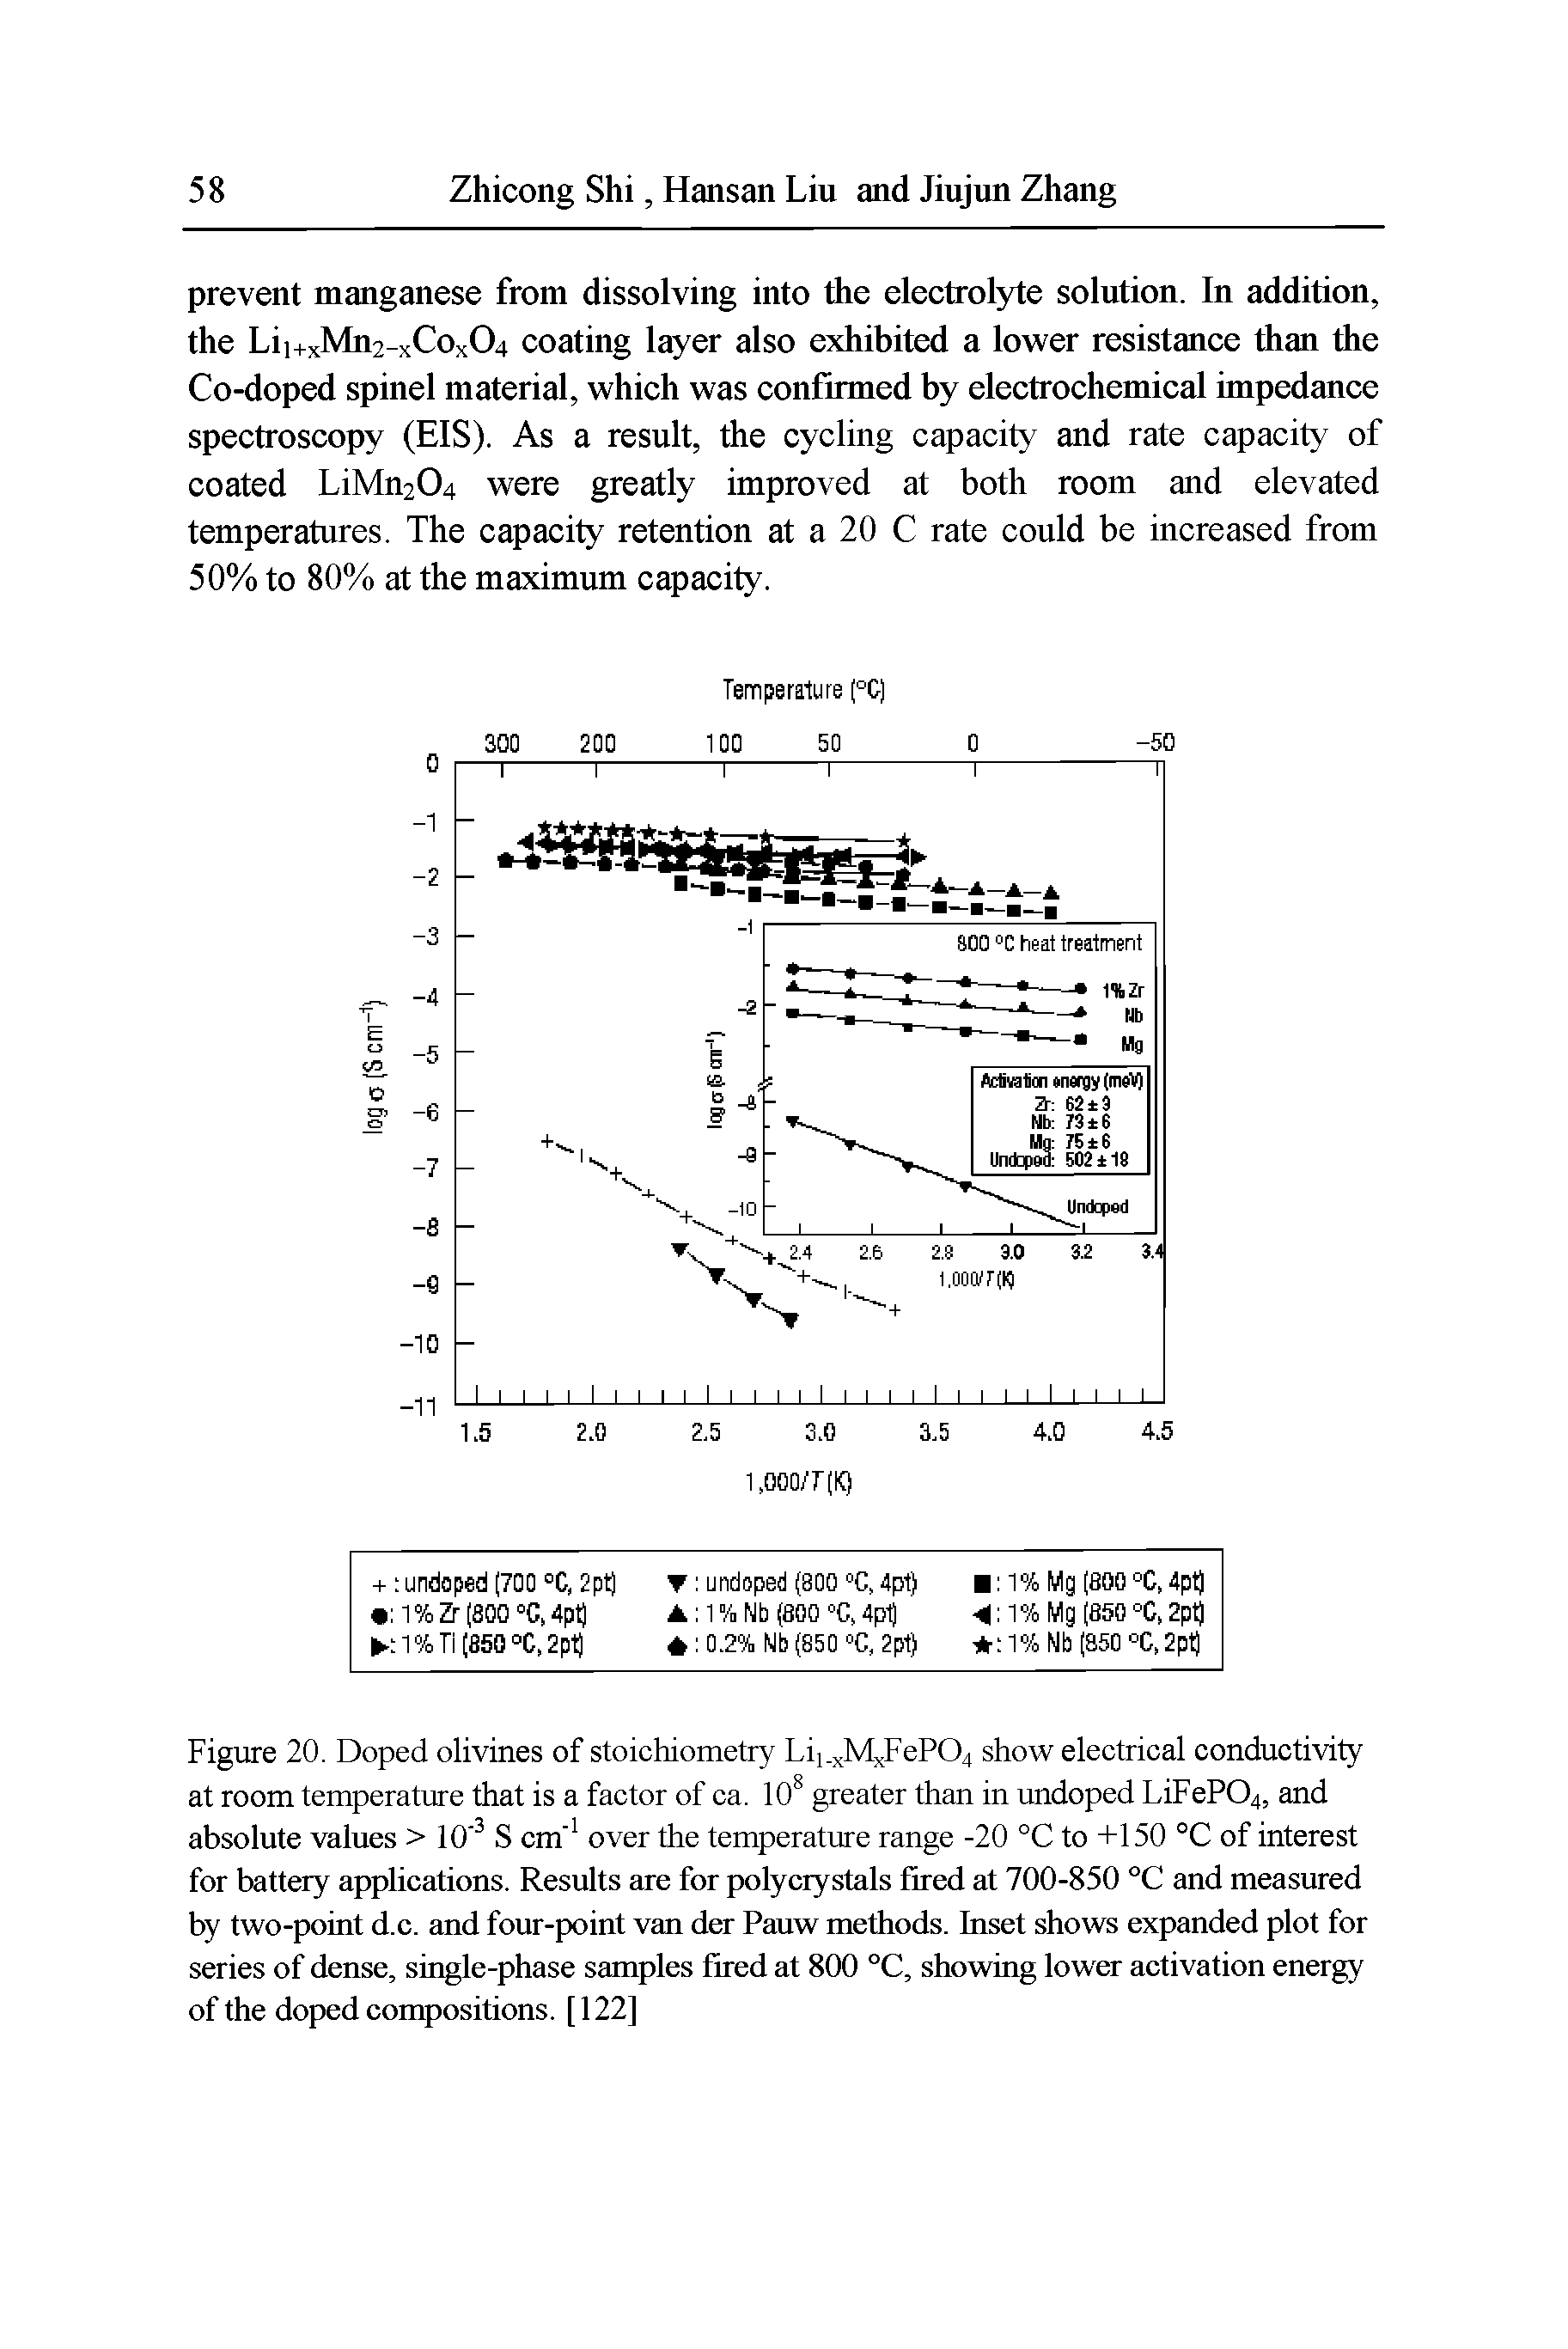 Figure 20. Doped olivines of stoichiometry Lii xMxFeP04 show electrical conductivity at room temperature that is a factor of ca. 10 greater than in undoped LiFeP04, and absolute values > 10 S cm" over the temperature range -20 °C to +150 °C of interest for battery applications. Results are for polyciystals fired at 700-850 °C and measured by two-point d.c. and four-point van der Pauw methods. Inset shows expanded plot for series of dense, single-phase samples fired at 800 °C, showing lower activation energy of the doped compositions. [122]...